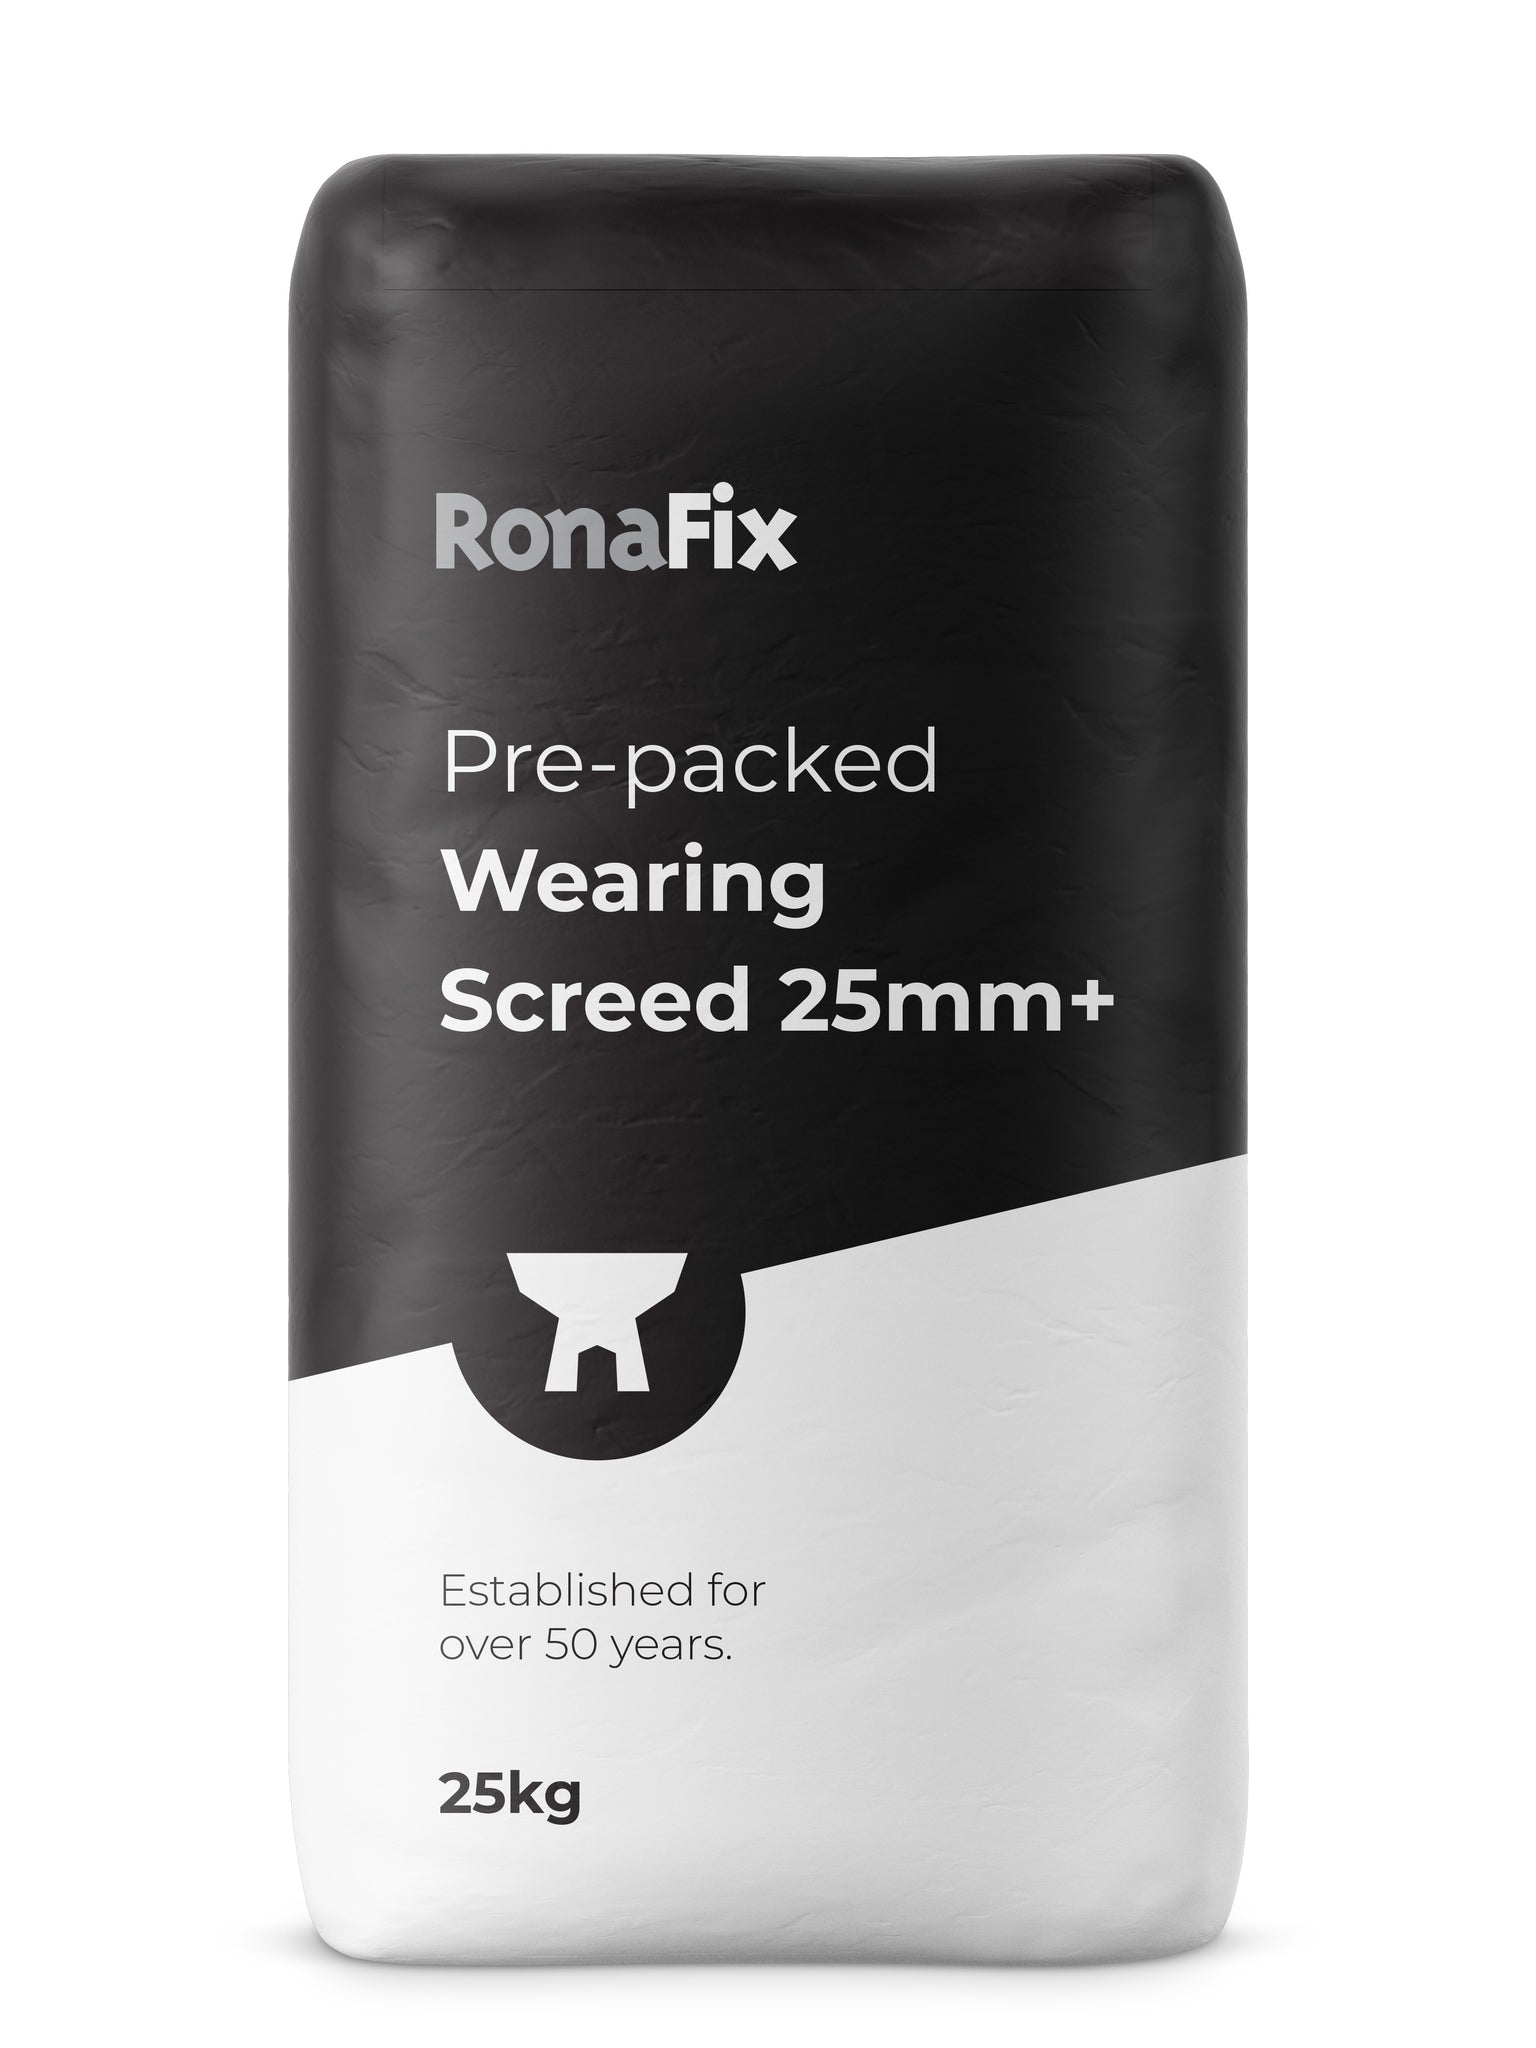 Ronafix Pre-packed Wearing Screed 25mm+